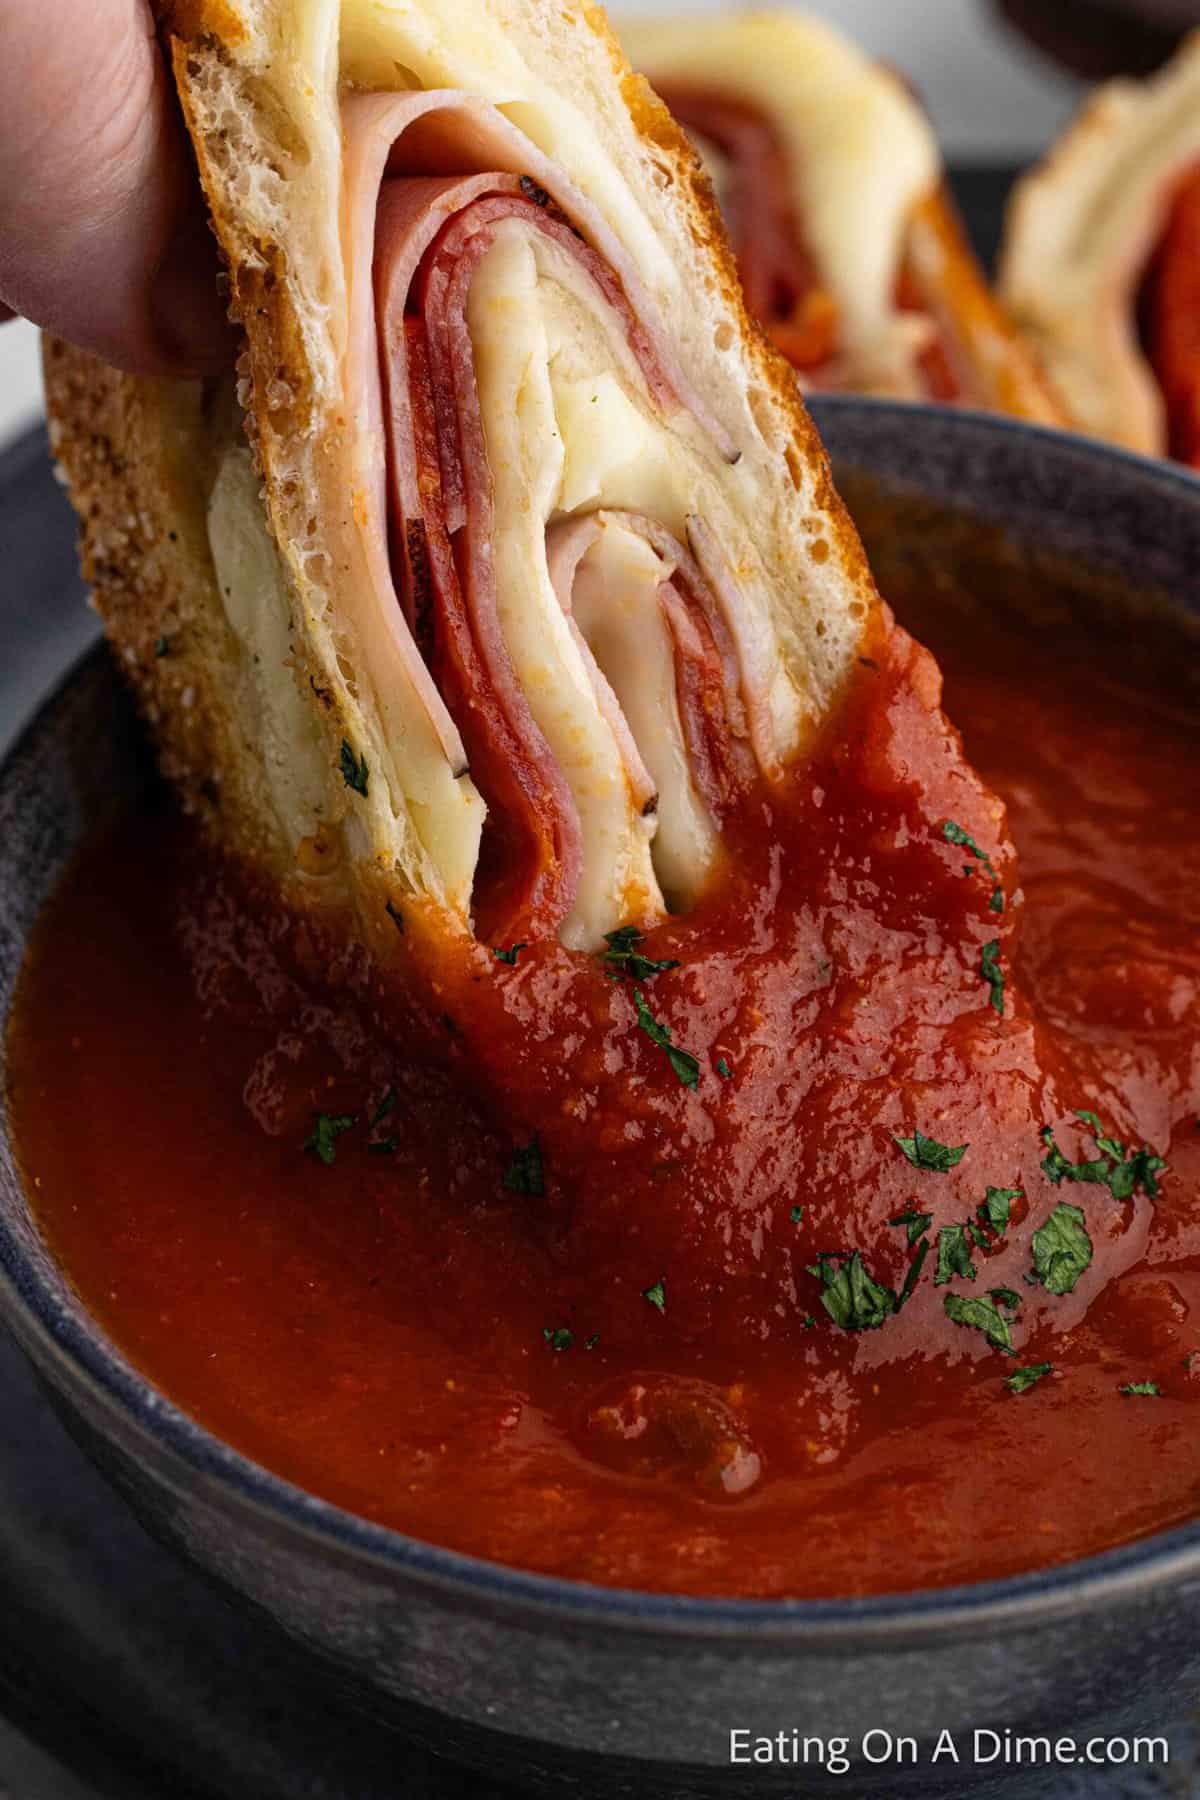 Dipping the stromboli with sauce